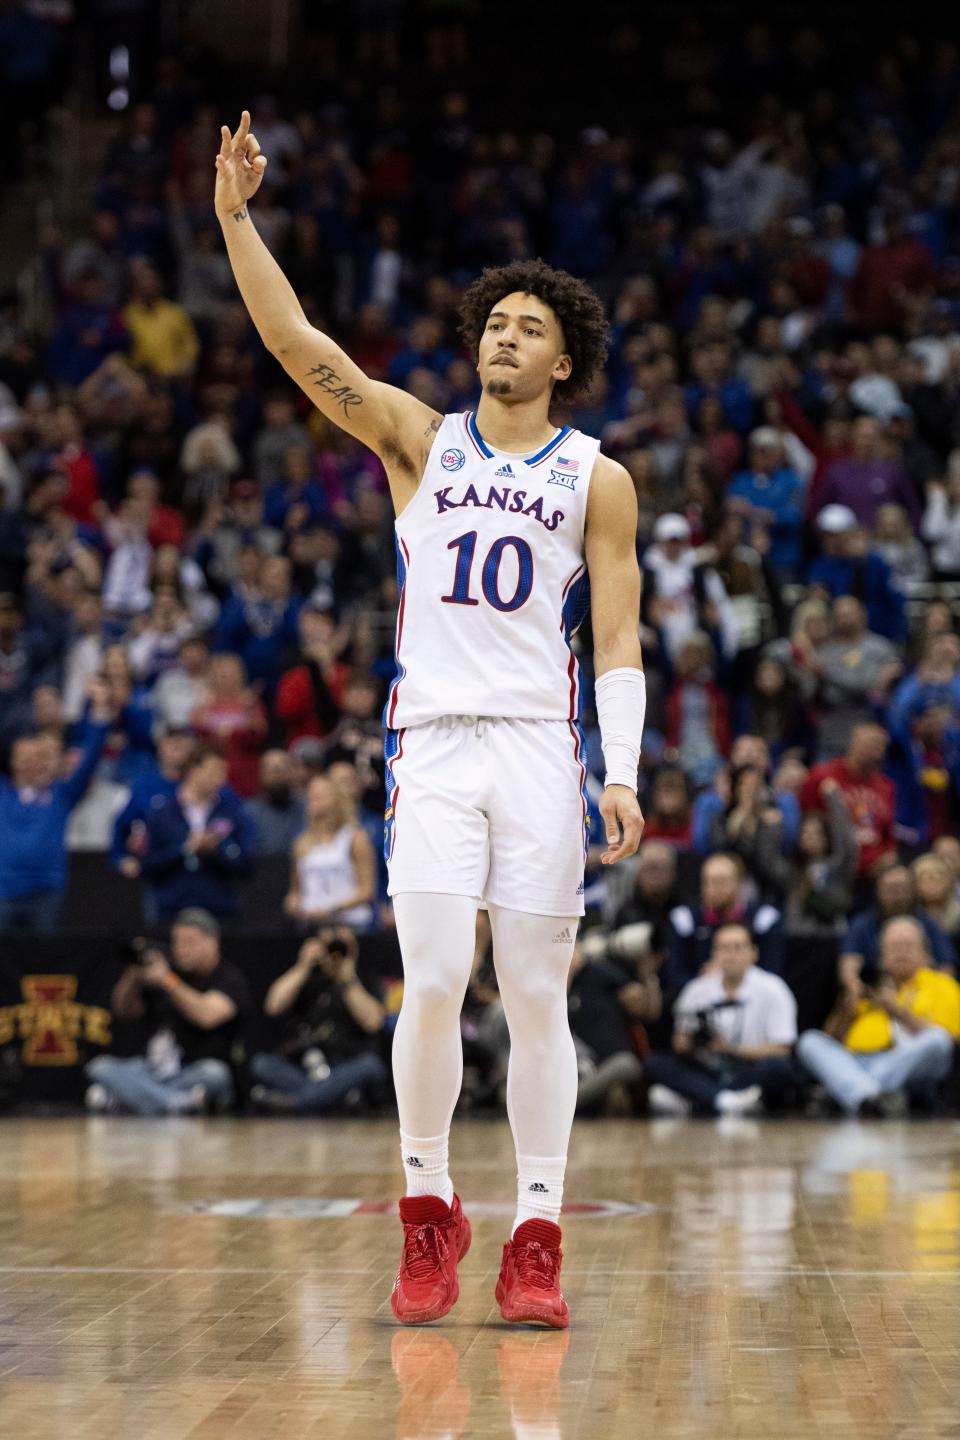 Kansas forward Jalen Wilson (10) celebrates a made three-point attempt against West Virginia during the Big 12 Conference tournament at the T-Mobile Center in Kansas City.